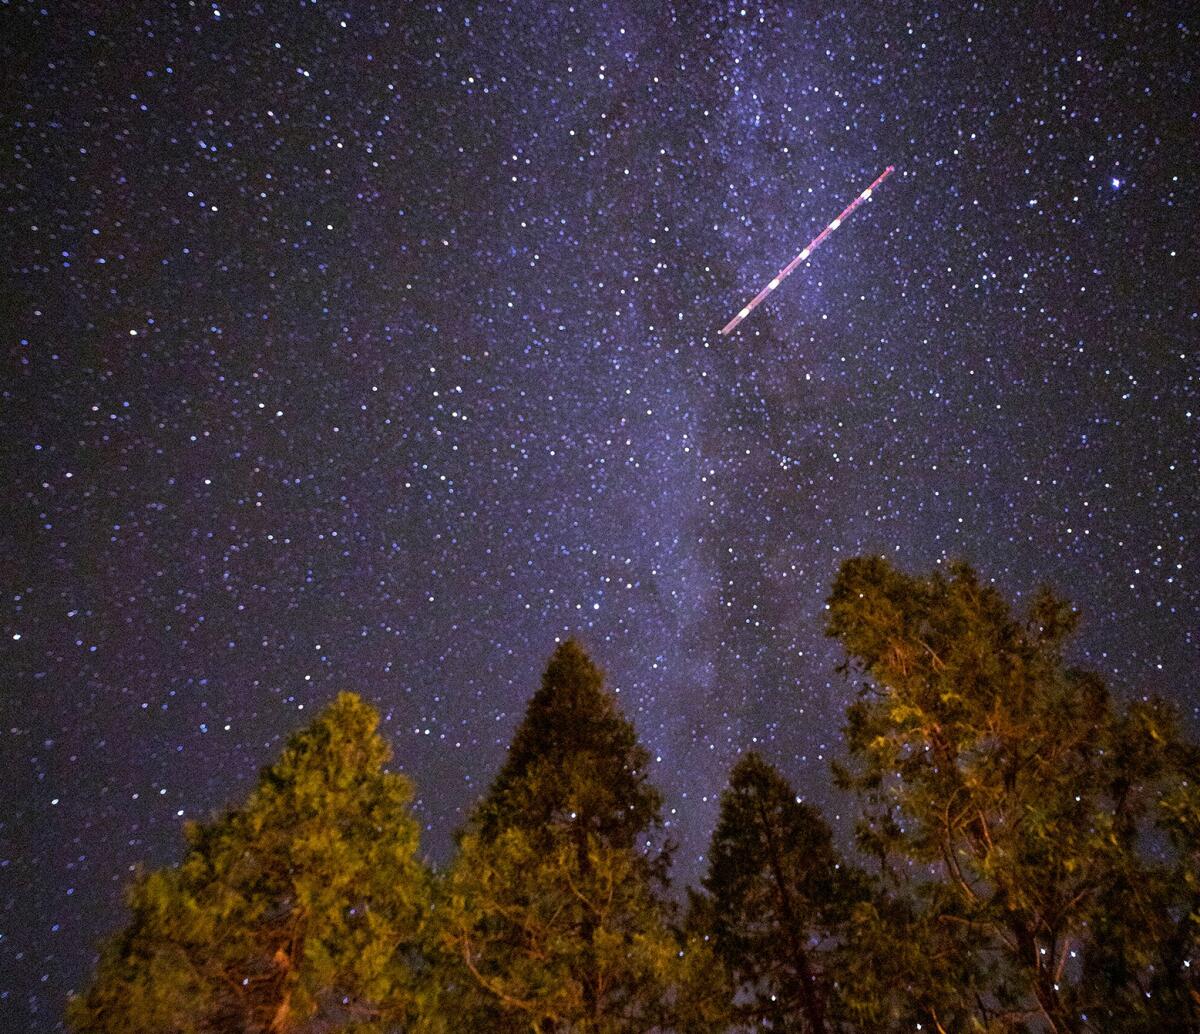  A view of bright stars and a streak in the sky. In the foreground are evergreen trees.